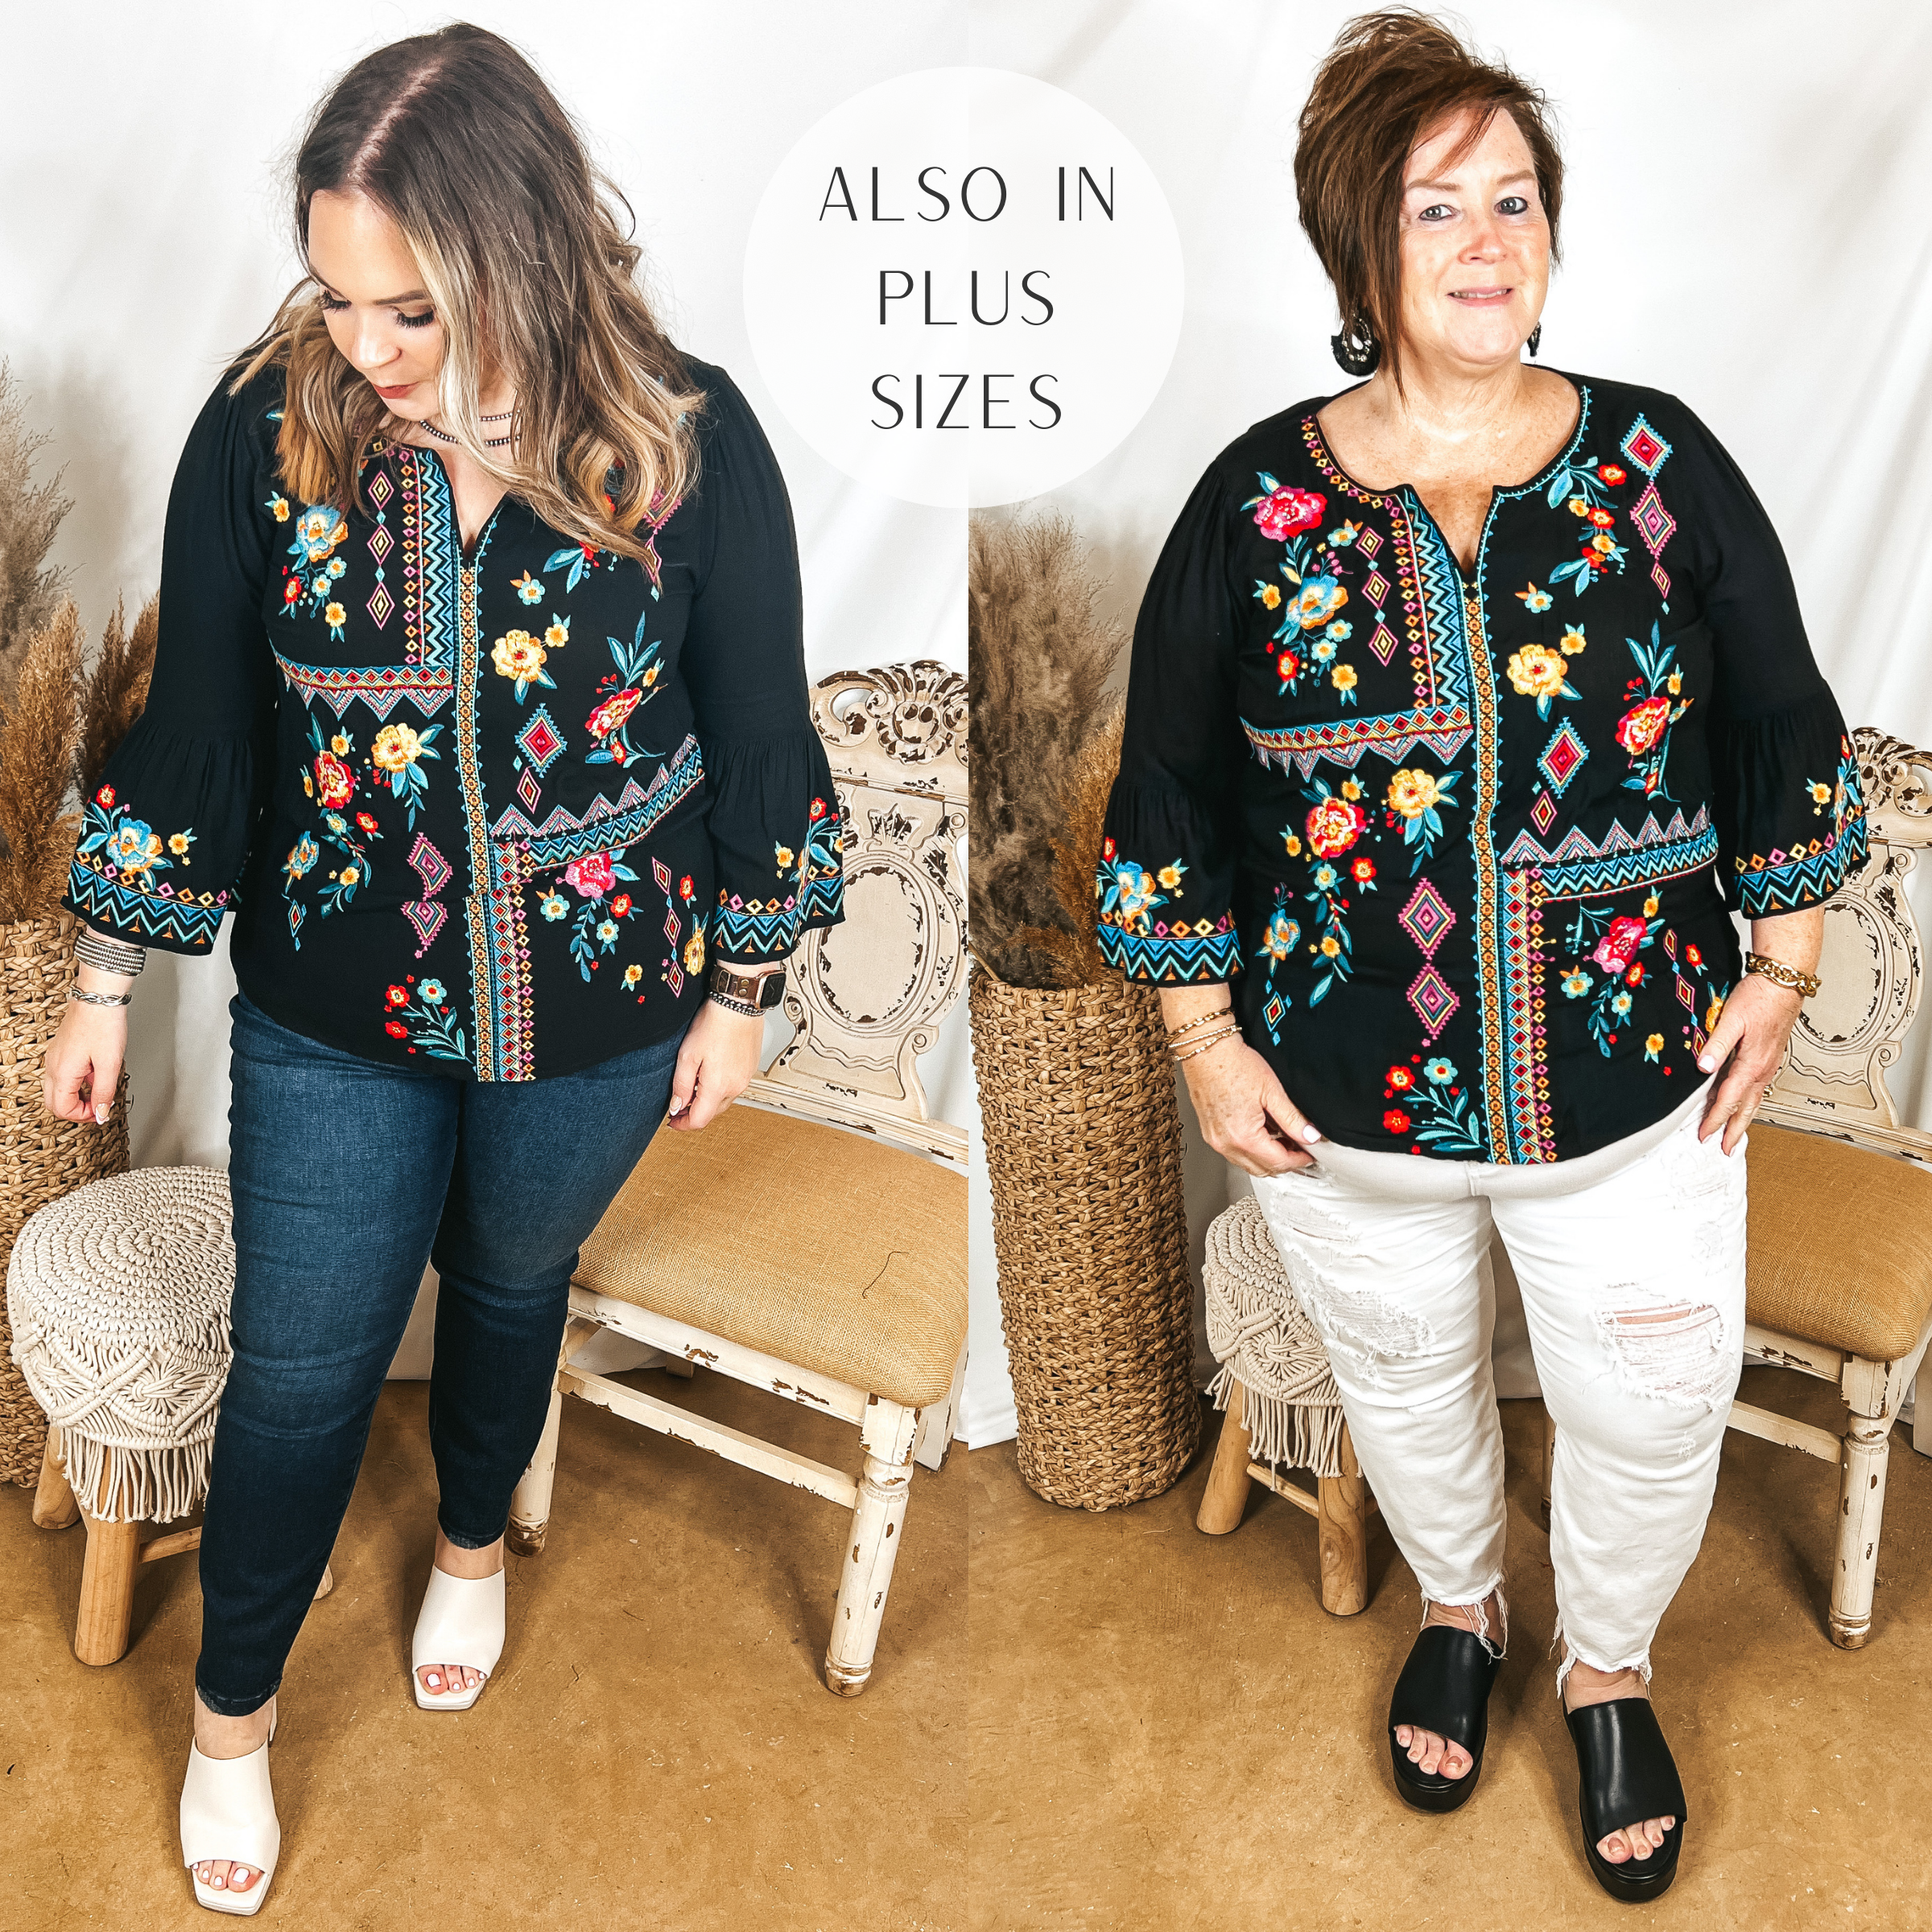 Models are wearing a black 3/4 sleeve top that has embroidery all over the front. Size large model has it paired with dark wash skinny jeans, white heels, and silver jewelry. Plus size model has it paired with white distressed jeans, black sandals, and black earrings.